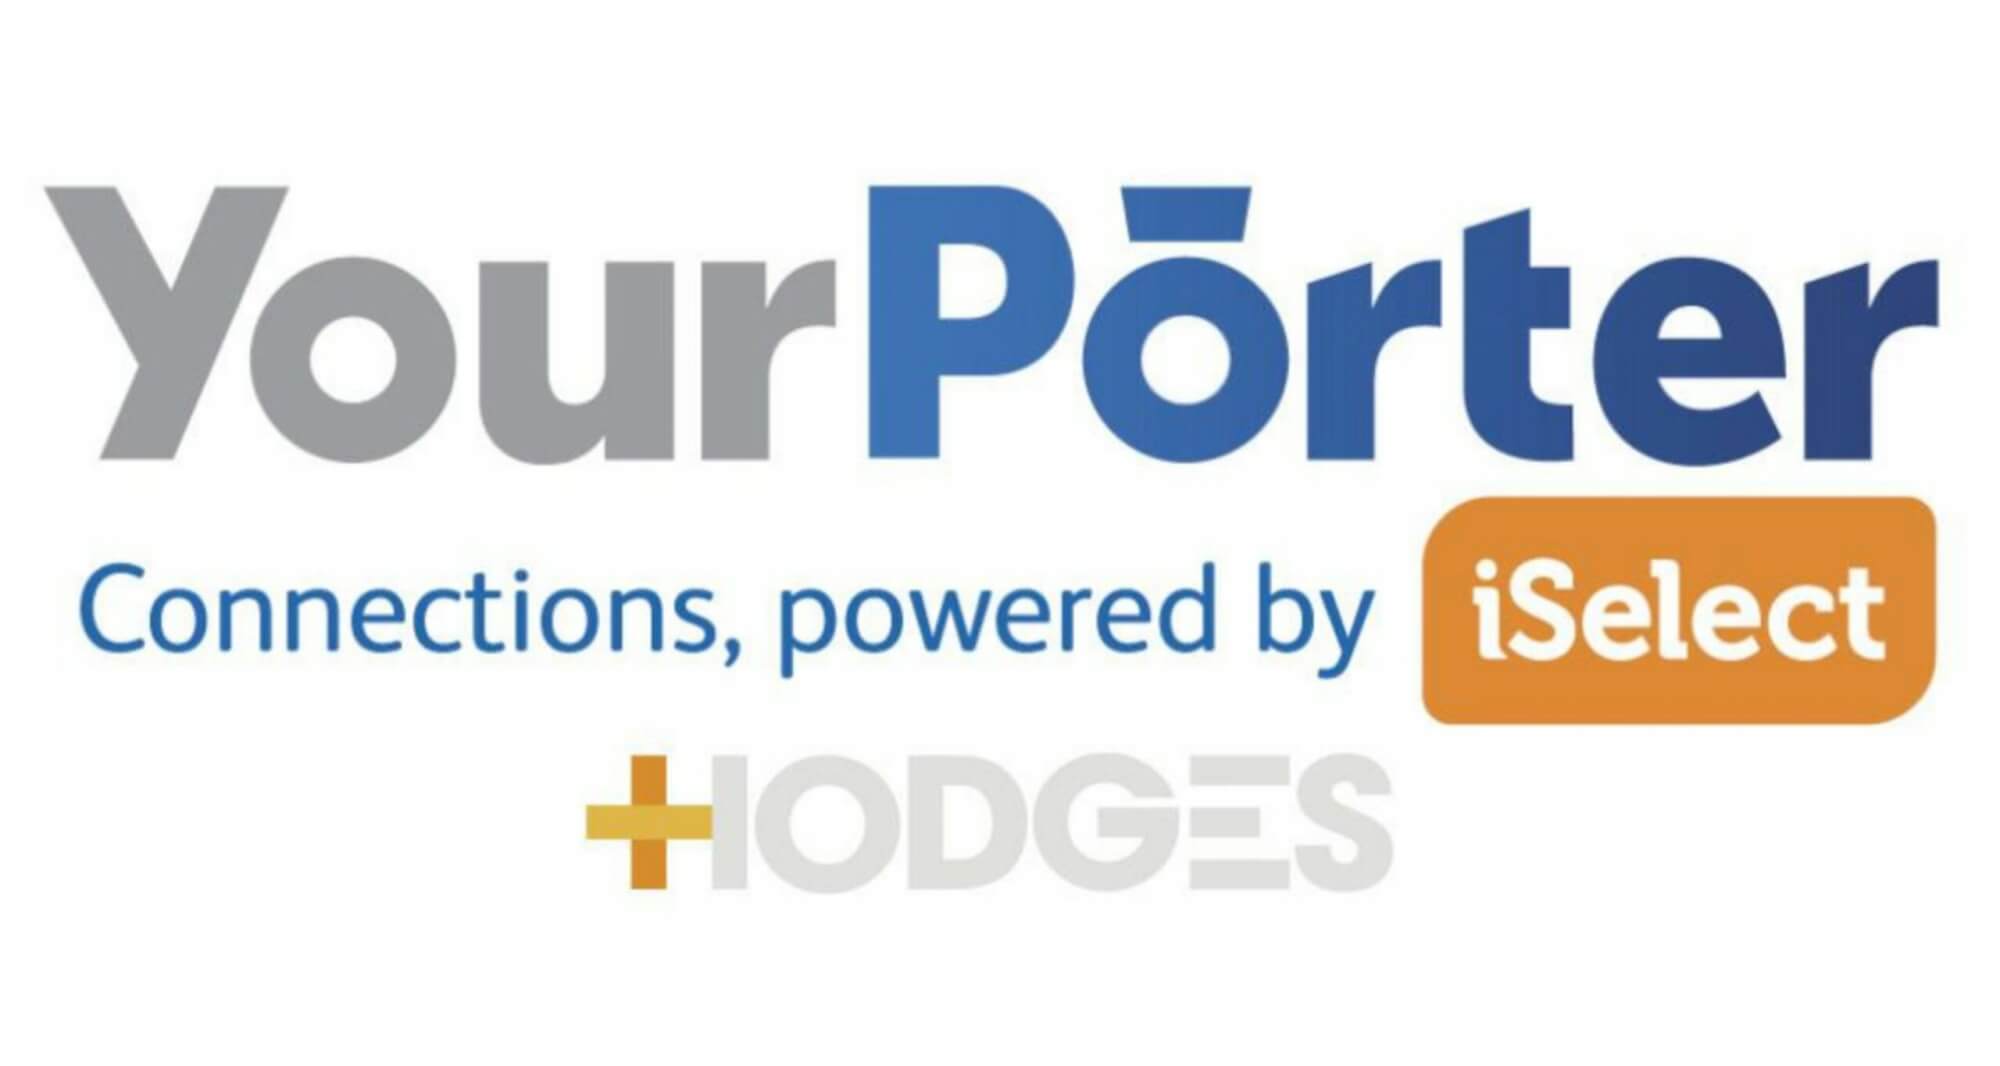 Hodges, Getting You More Connectivity!